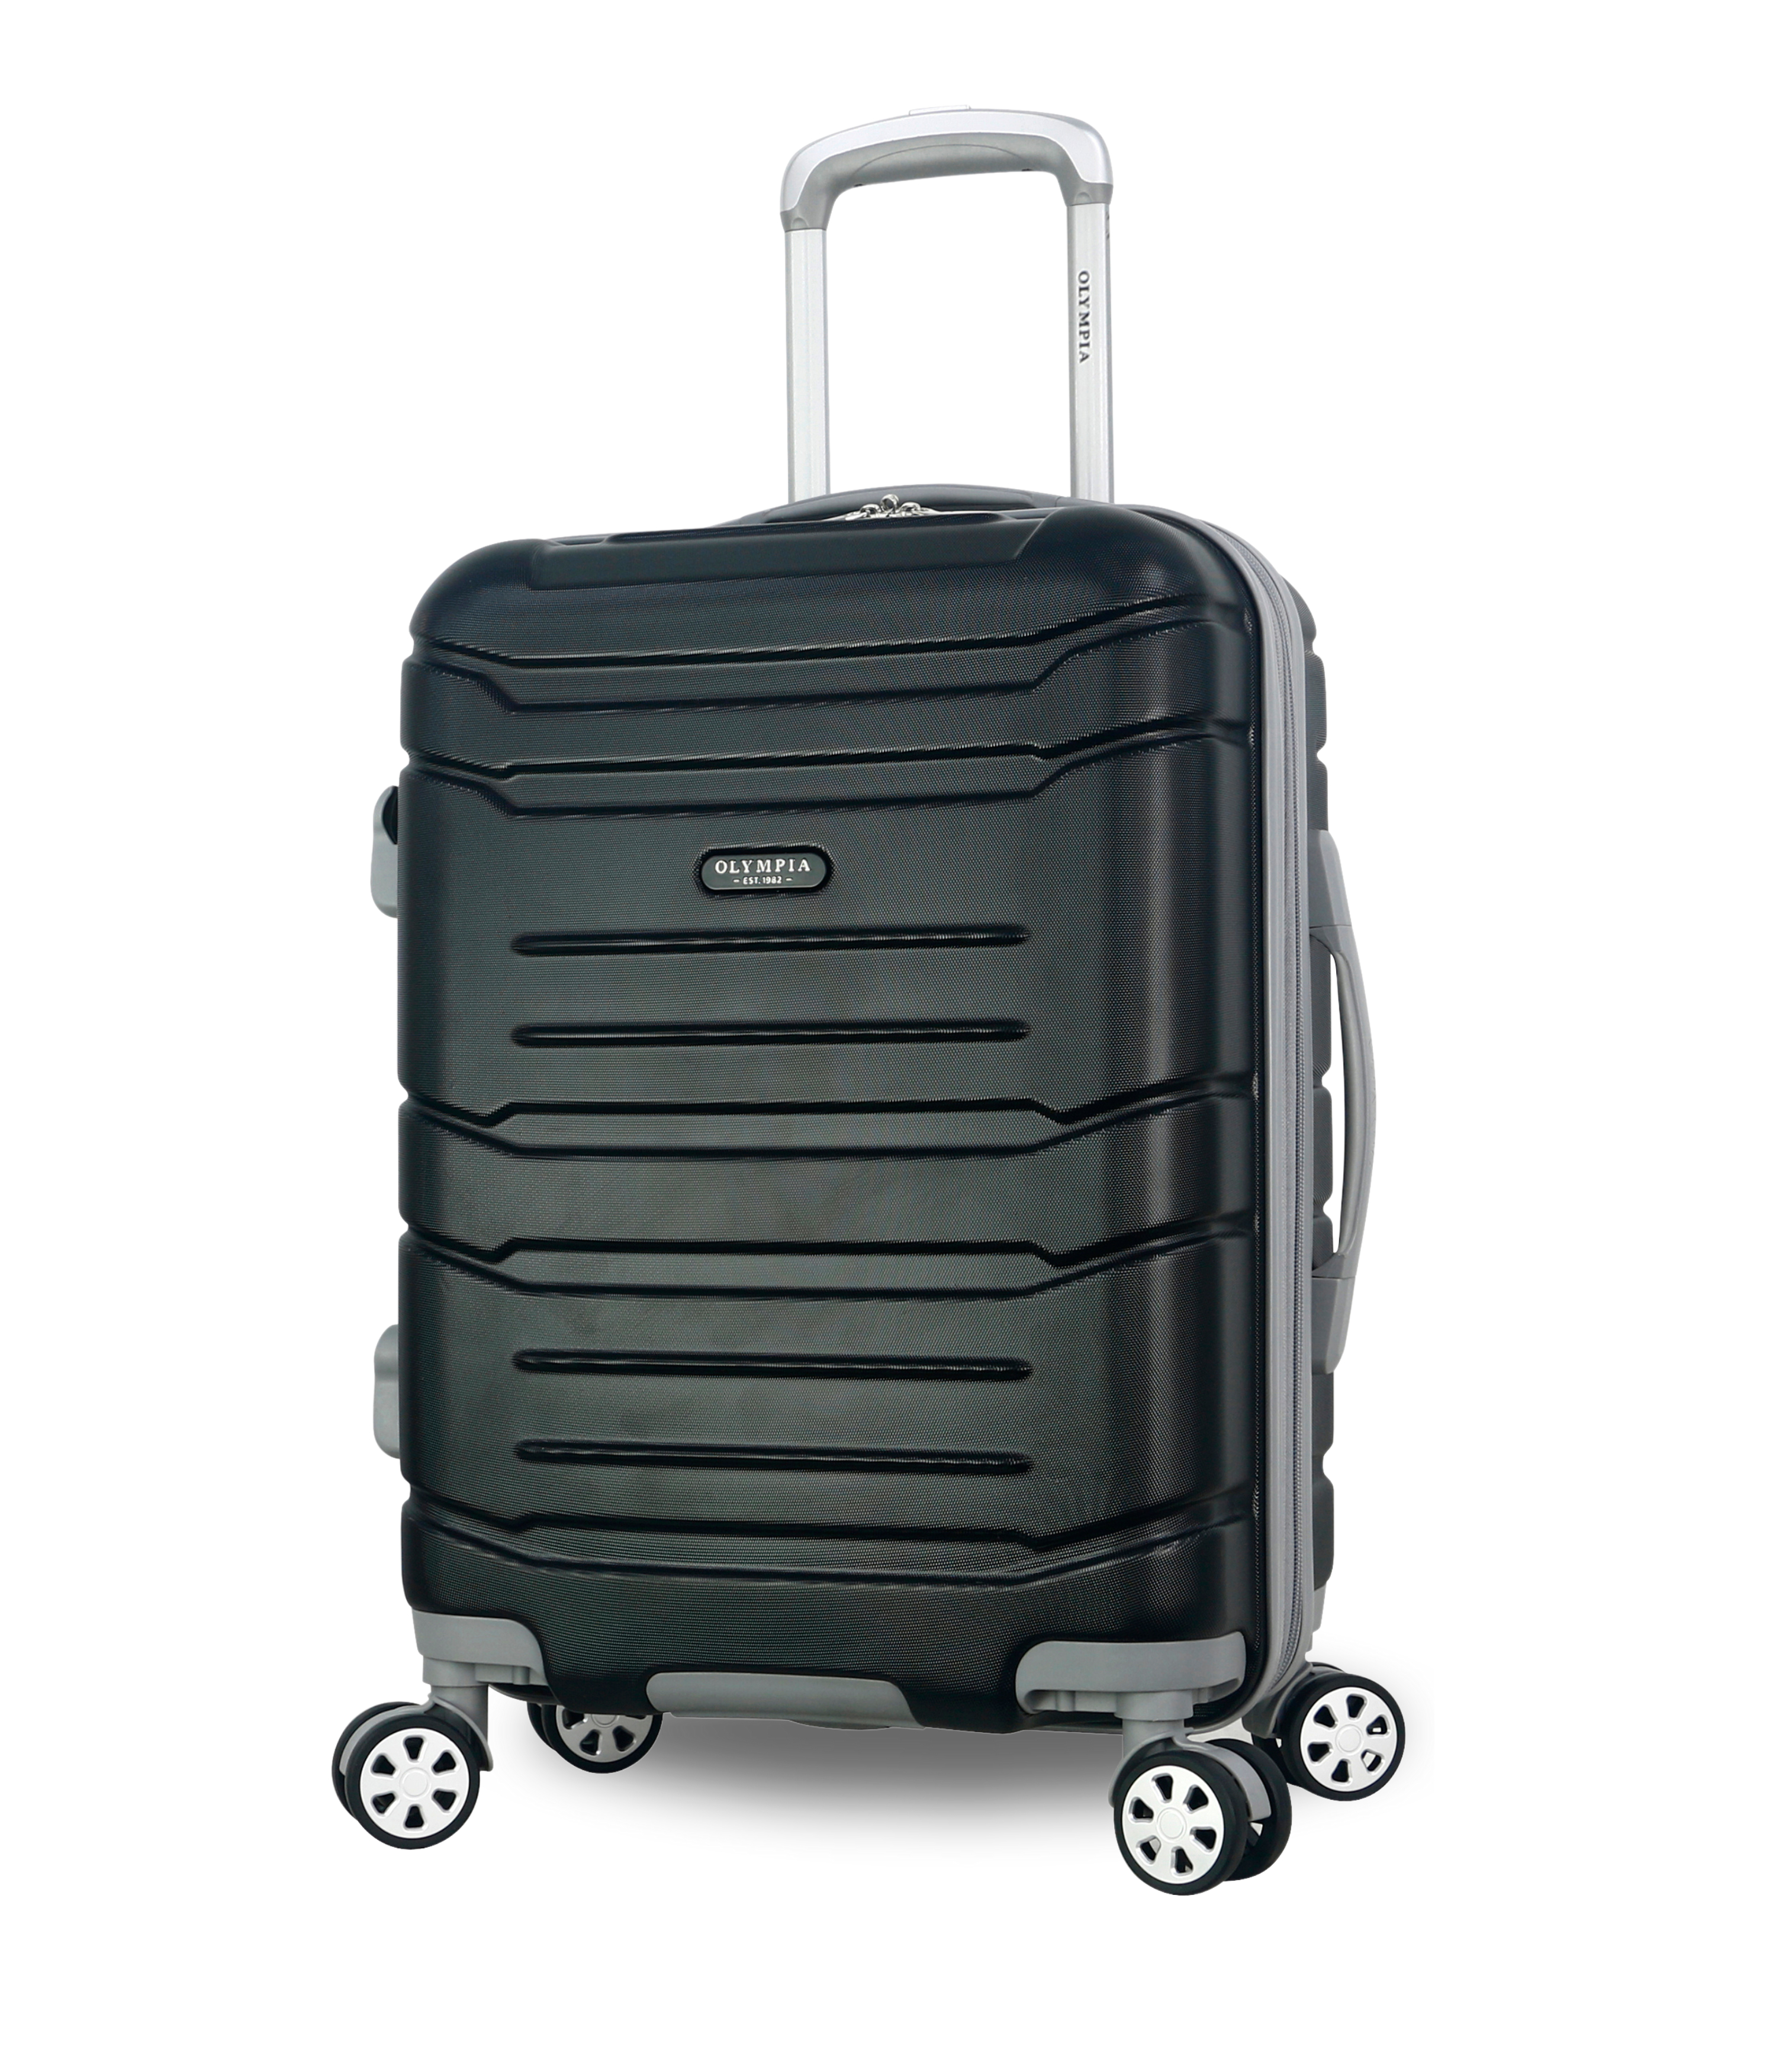 Olympia Denmark 22" Expandable Carry On with Laptop compartment, 8 dual Wheel Spinner